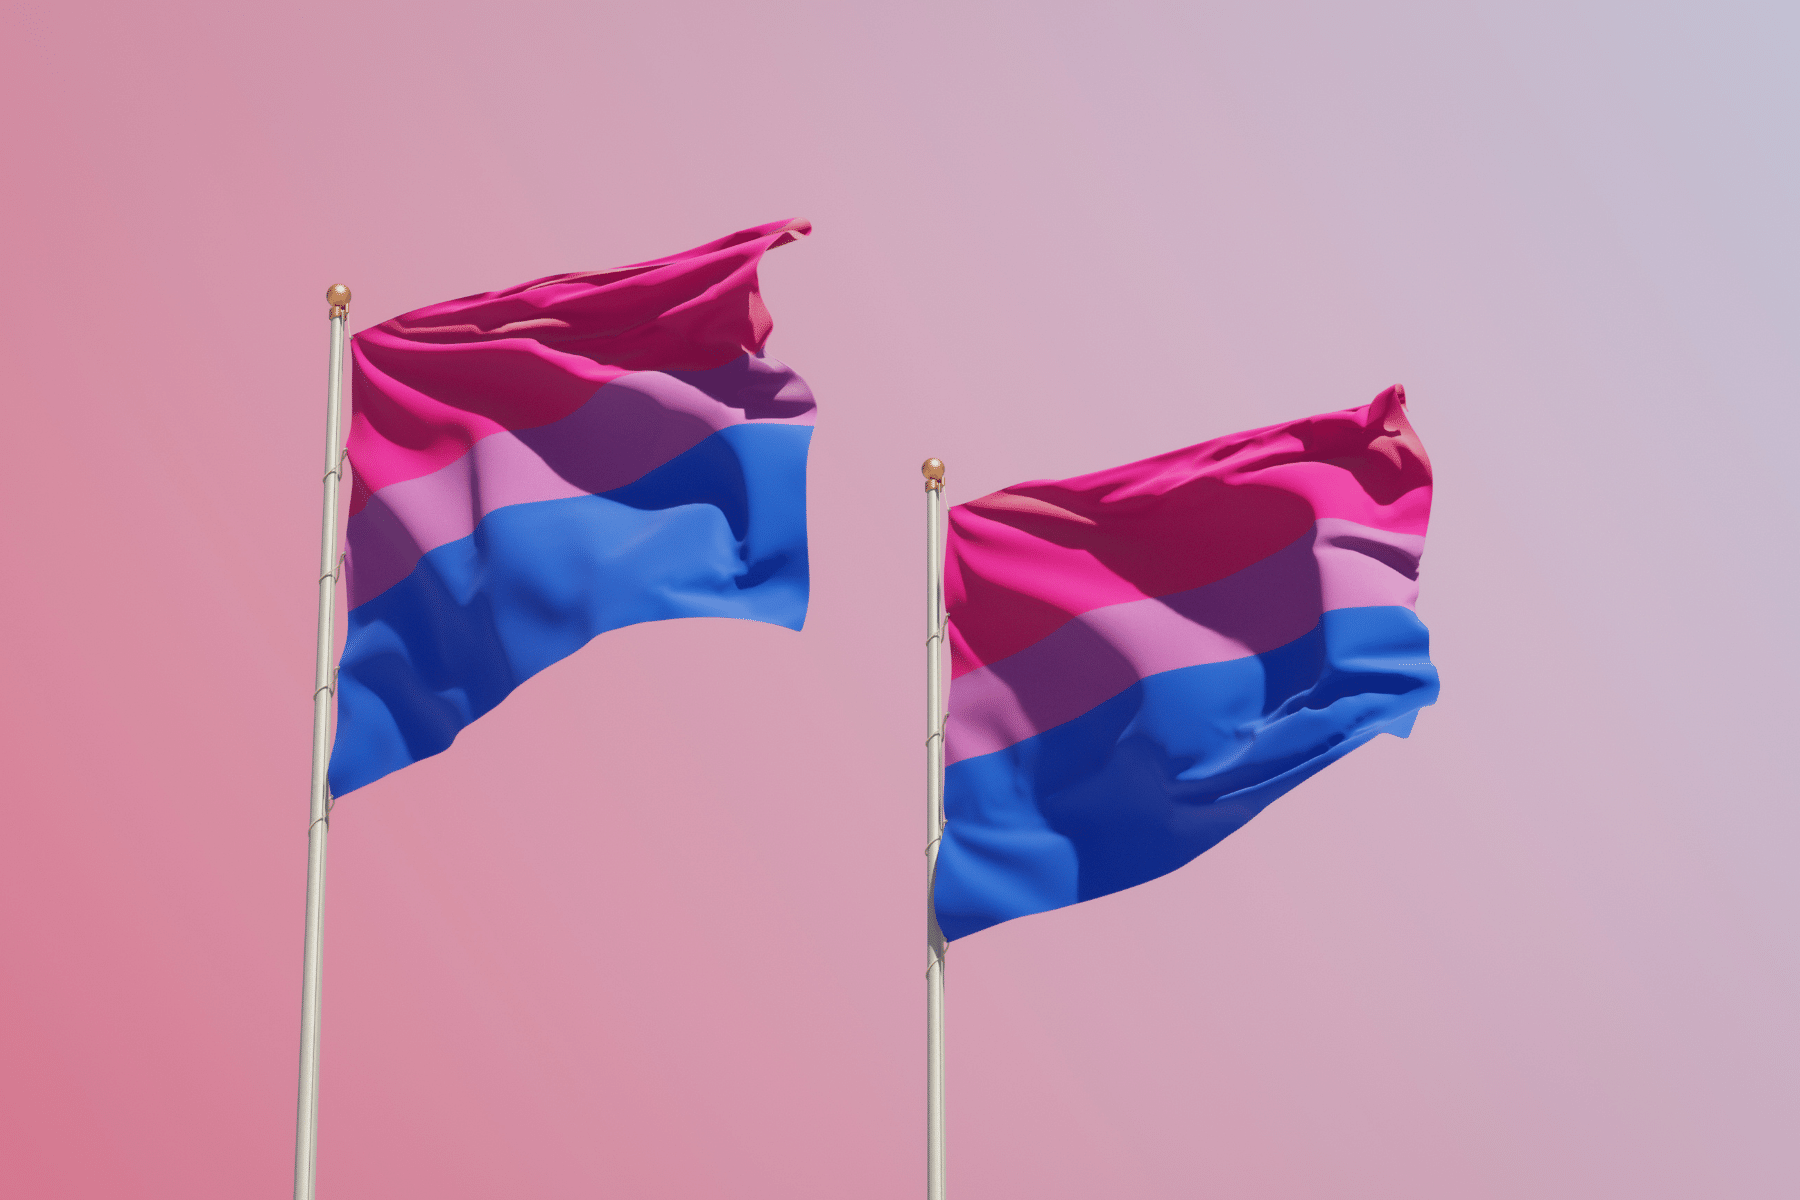 bisexual flag on a pink background